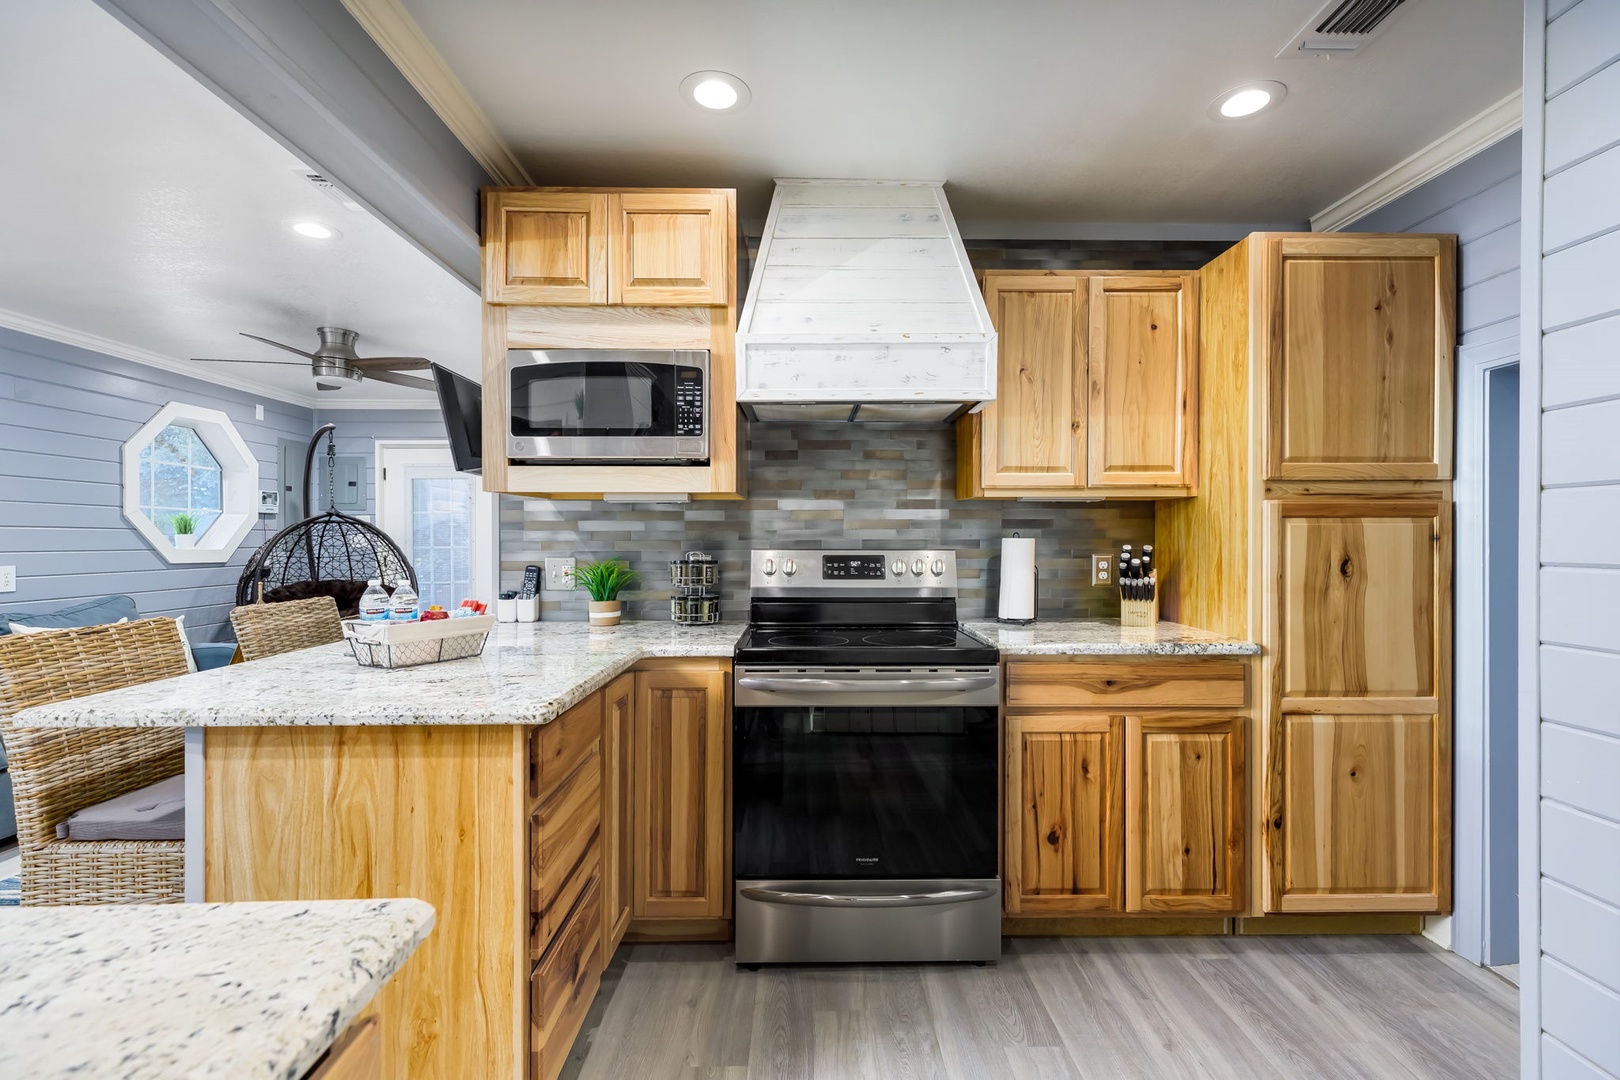 The cabin’s inviting kitchen offers ample space & all the comforts of home